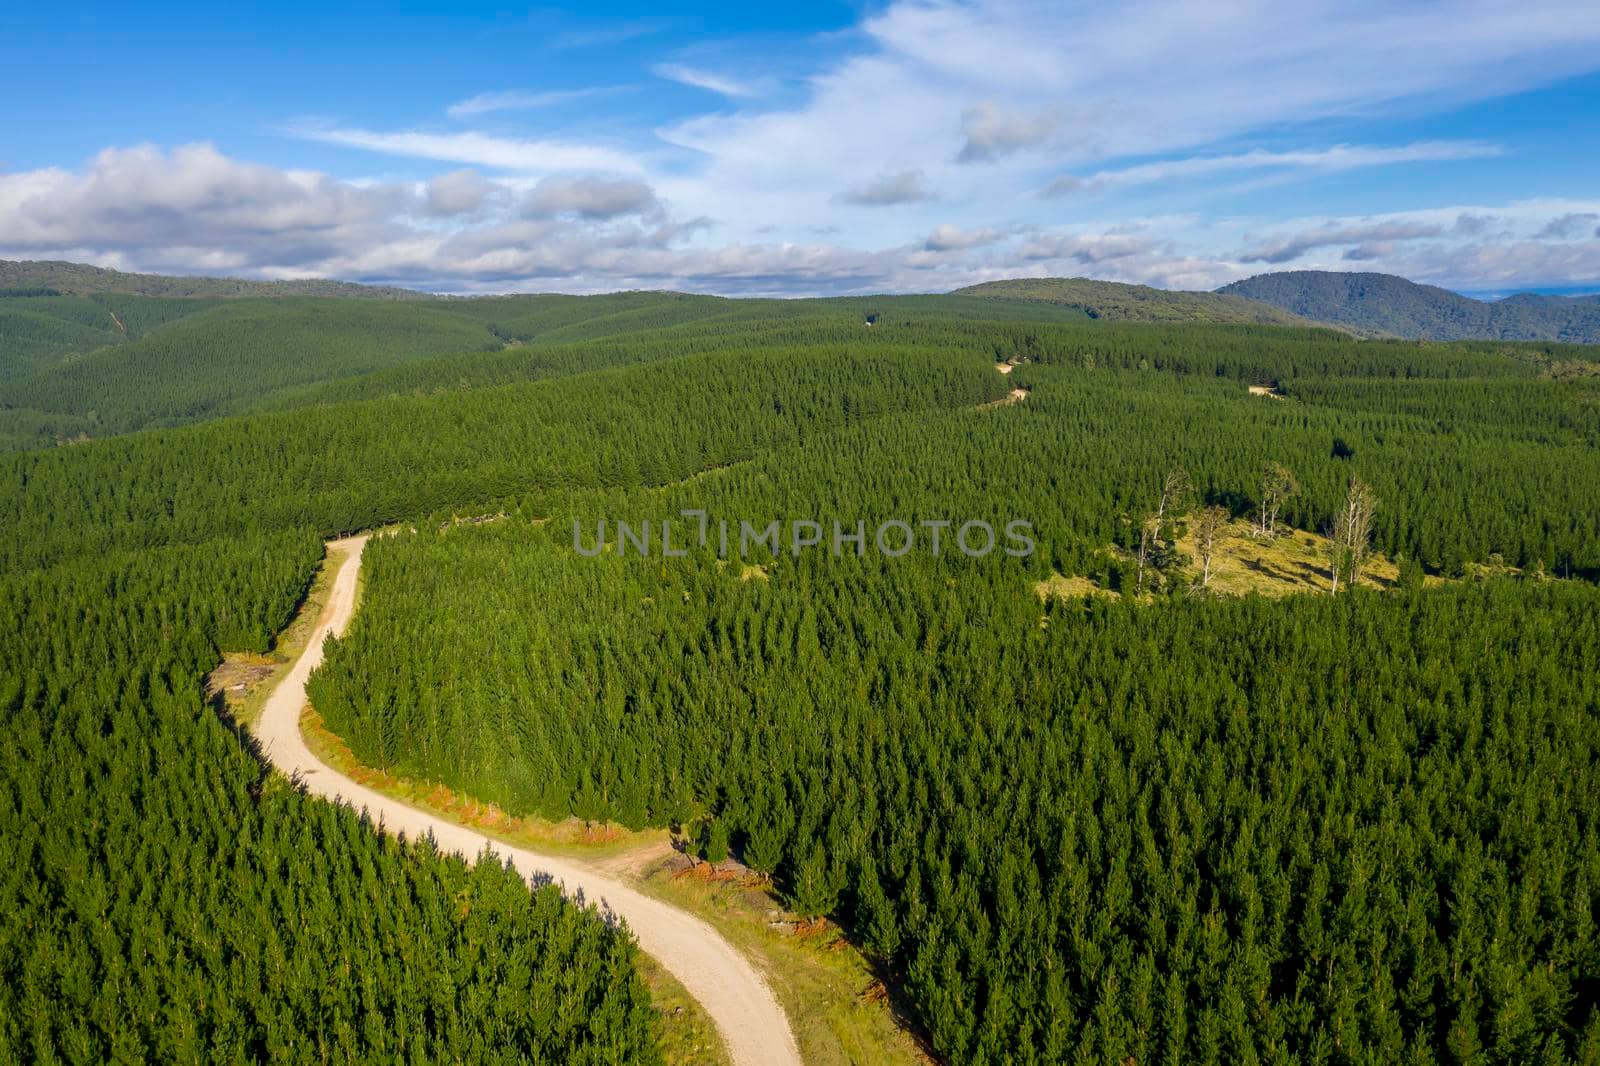 Aerial view of a dirt road running through an industrial cultivated pine tree farm in a large valley in the Central Tablelands in regional New South Wales in Australia